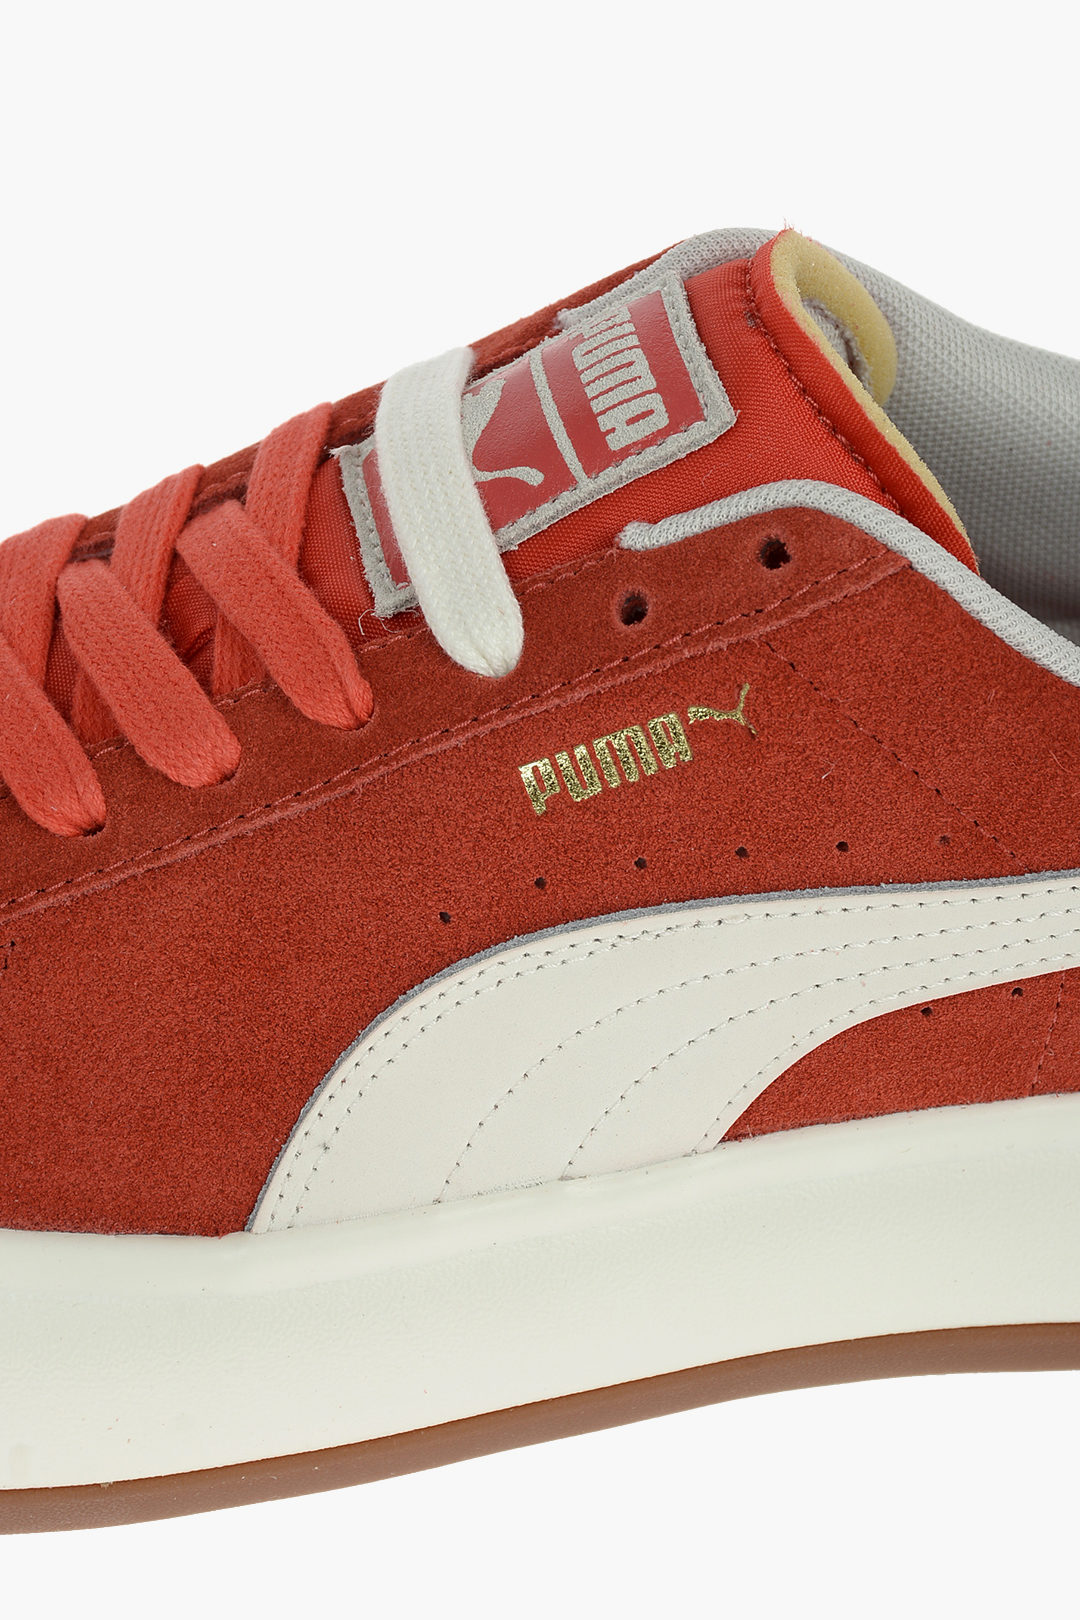 walvis Winst Andrew Halliday Puma Suede MAYU Sneakers women - Glamood Outlet